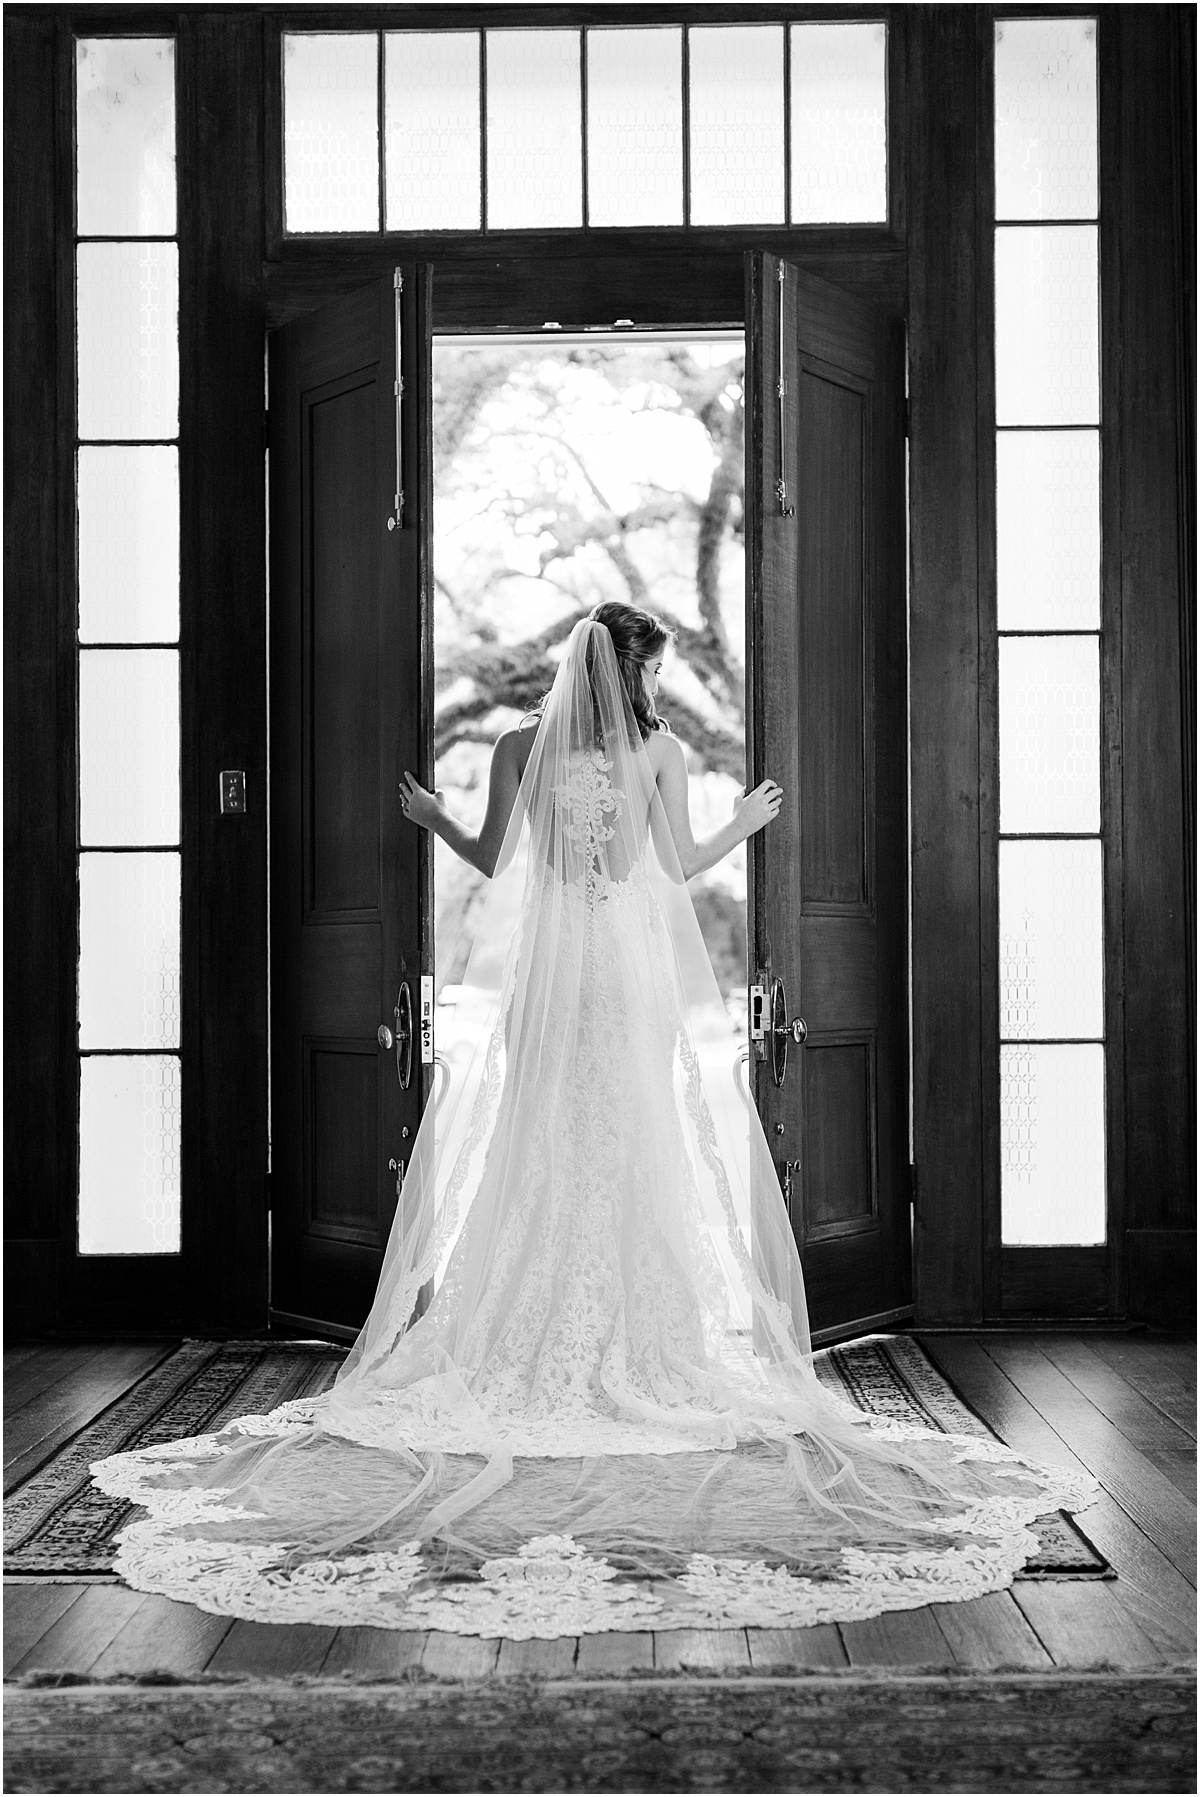 A bride standing in front of the large wood doors at The Bragg-Mitchell Mansion looking out into the front lawn.